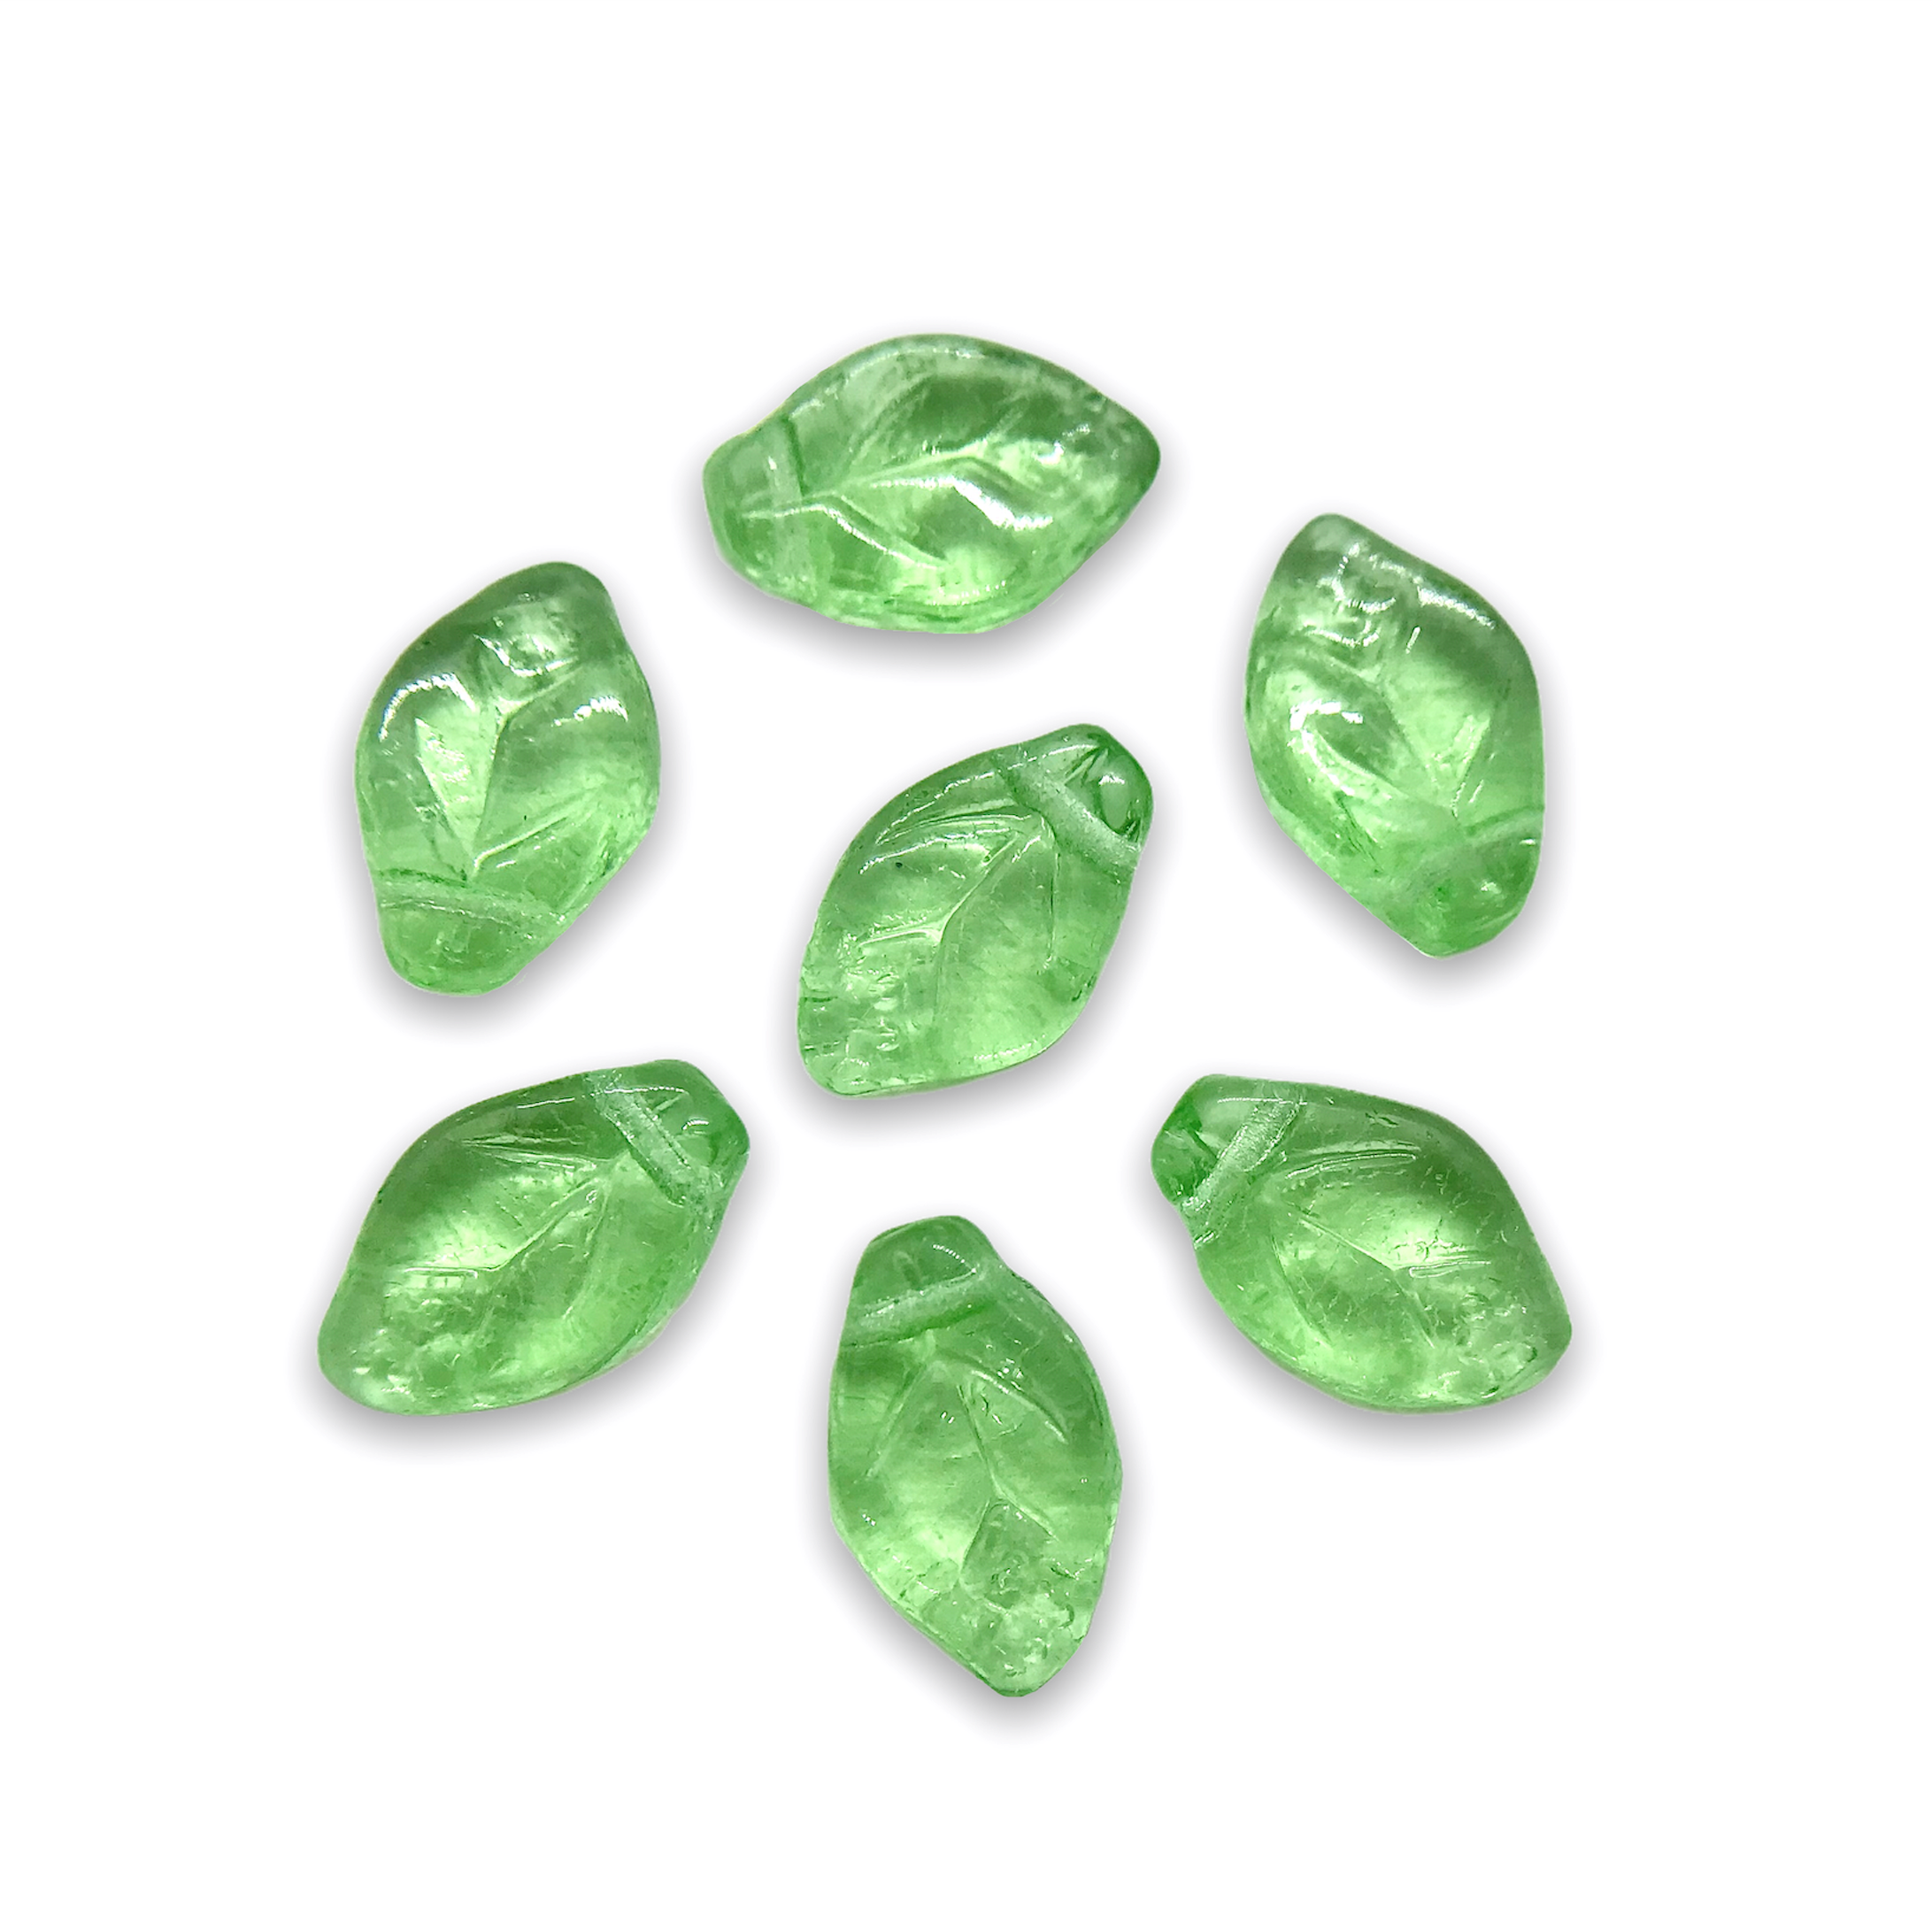 Frosted Translucent Yellowish Green Acrylic Leaf Beads with 1mm